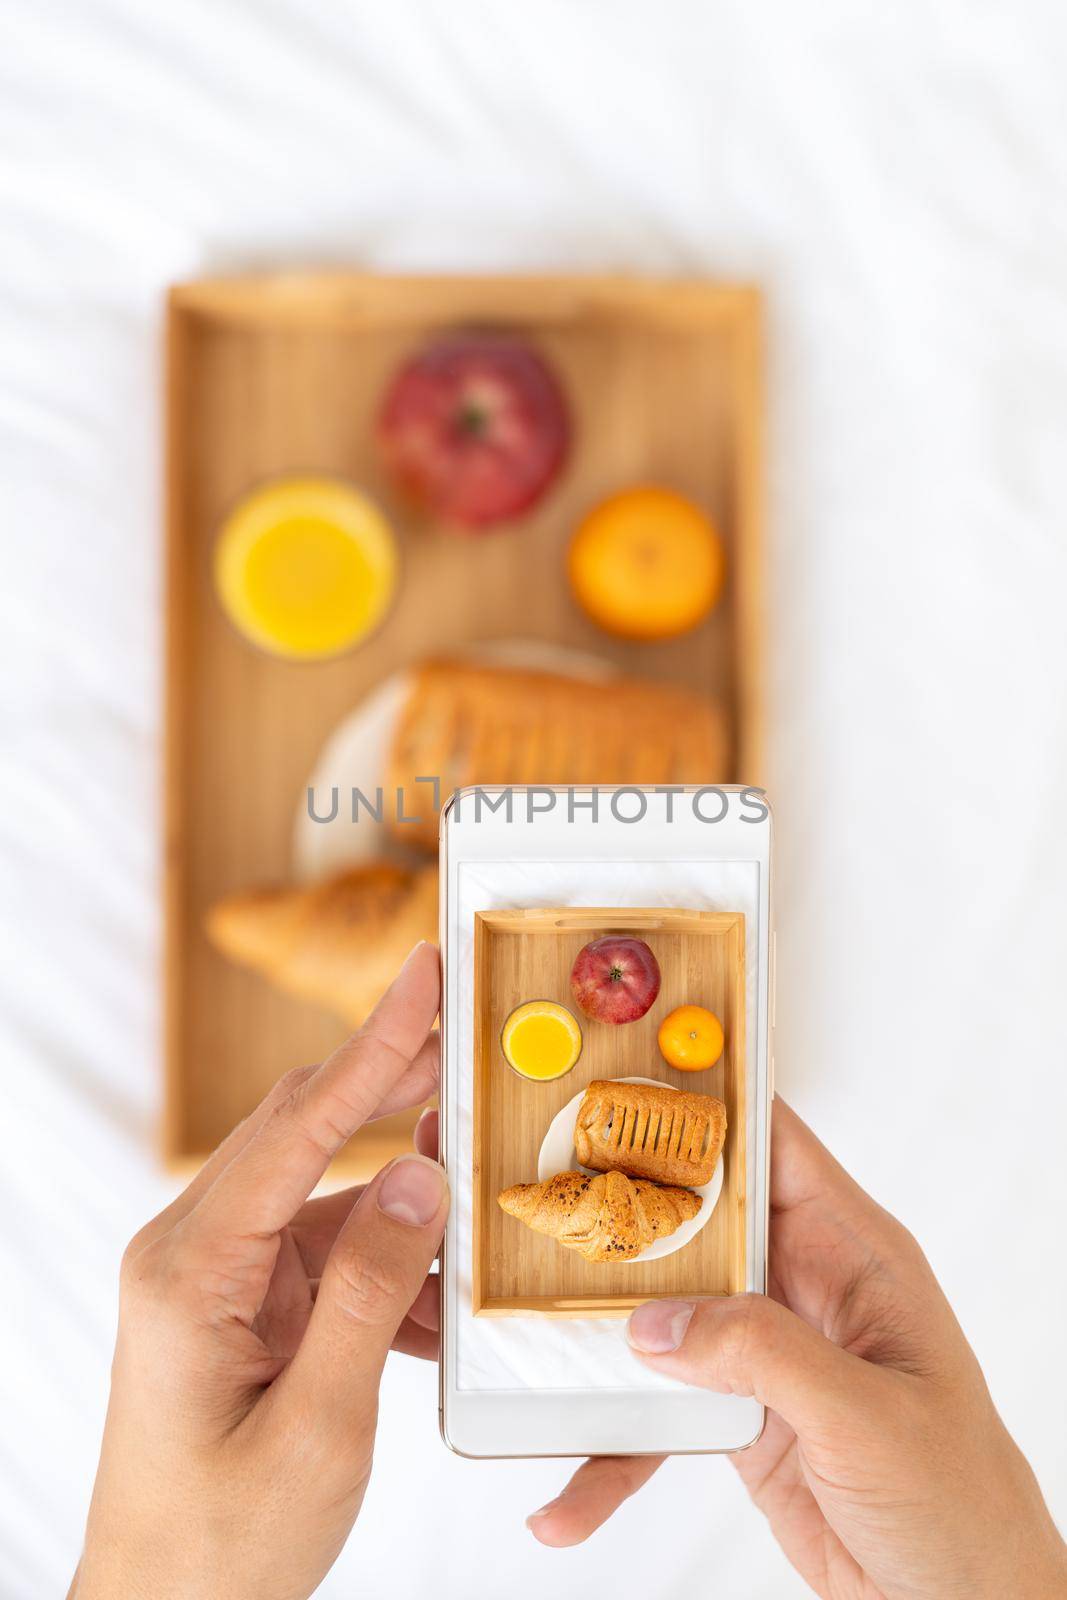 Blogger taking photos of food, shooting Breakfast in bed at hotel on mobile phone, tray with juice, fruit and croissant on white sheets